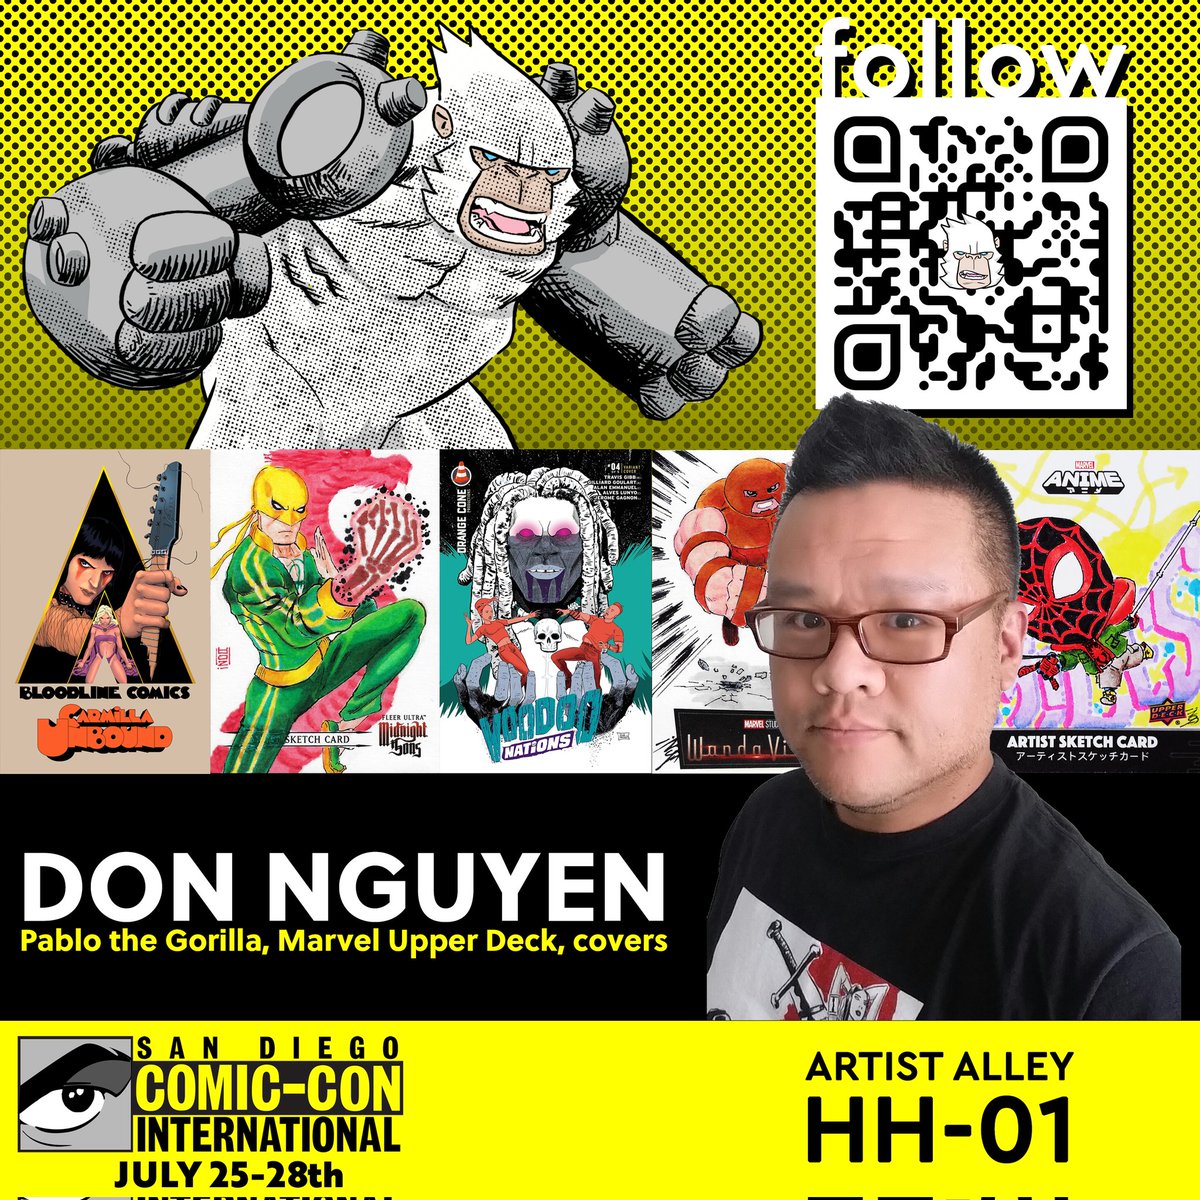 I want to make fun art, fun books & hope you have a fun time at any shows I attend. I'll be at #SDCC Artist Alley HH-01 alongside my friends @Komickarl , @faedri @davidmackkabuki . Ask us about #commissions & original art!